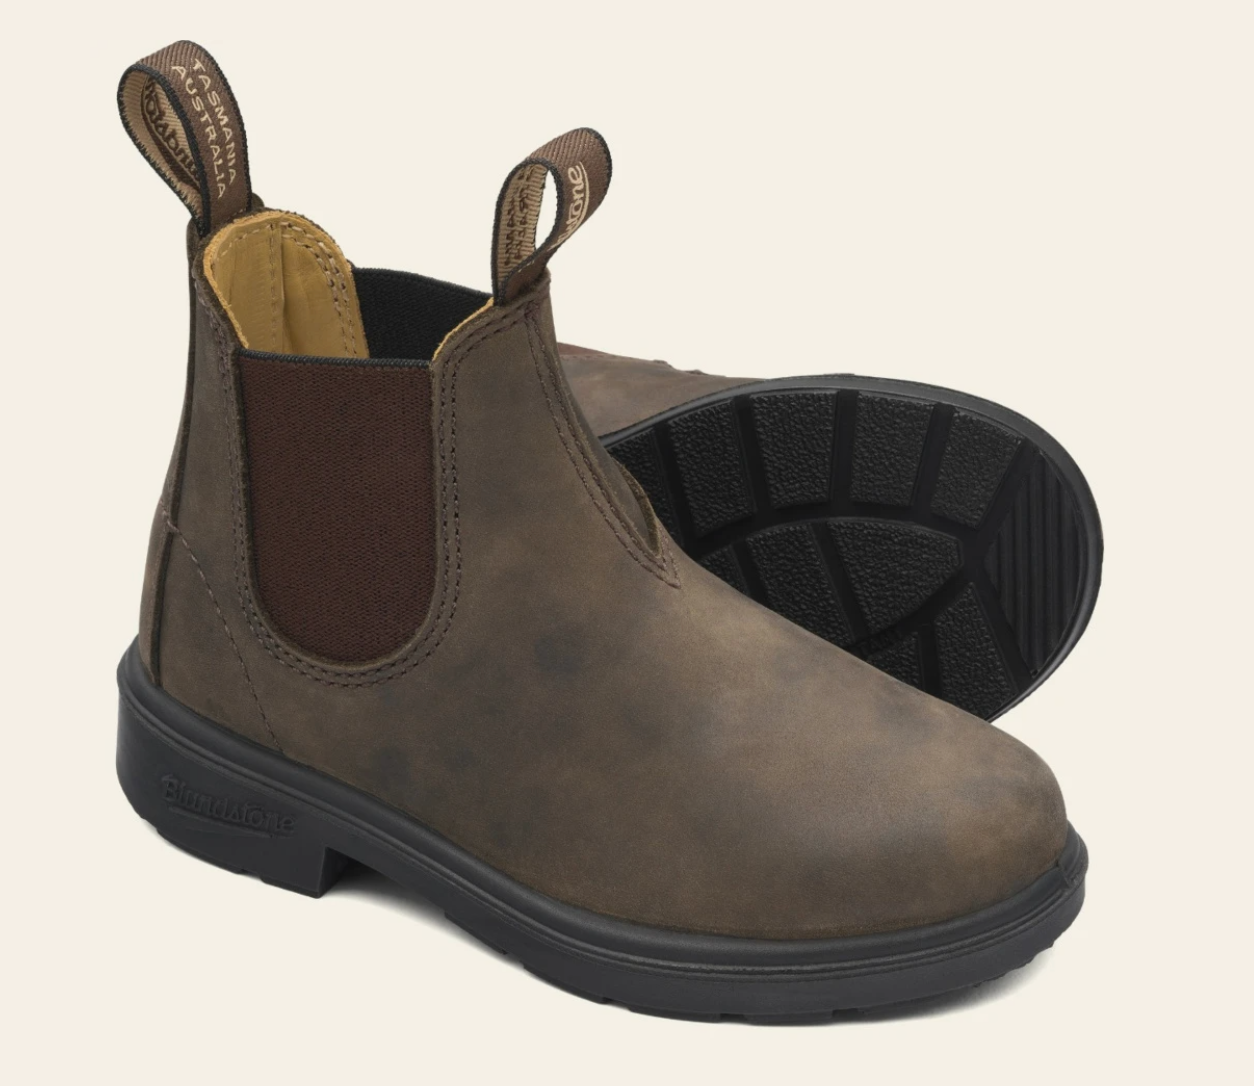 Blundstone 565 Leather Pull-On Boot (/Toddler/Little Kid/Big Kid)